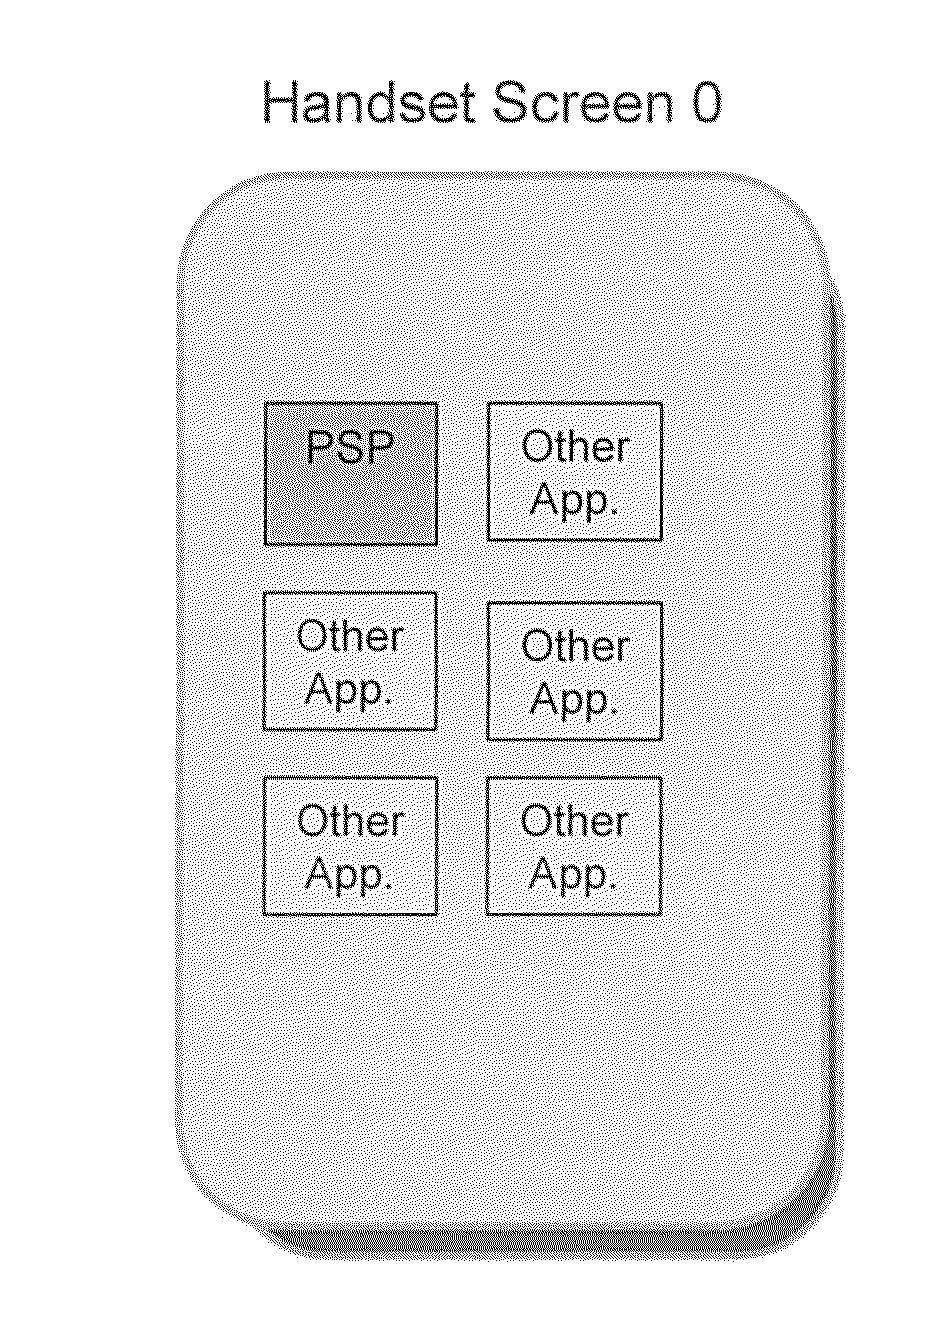 Methods and systems for electronic payment for parking in gated garages